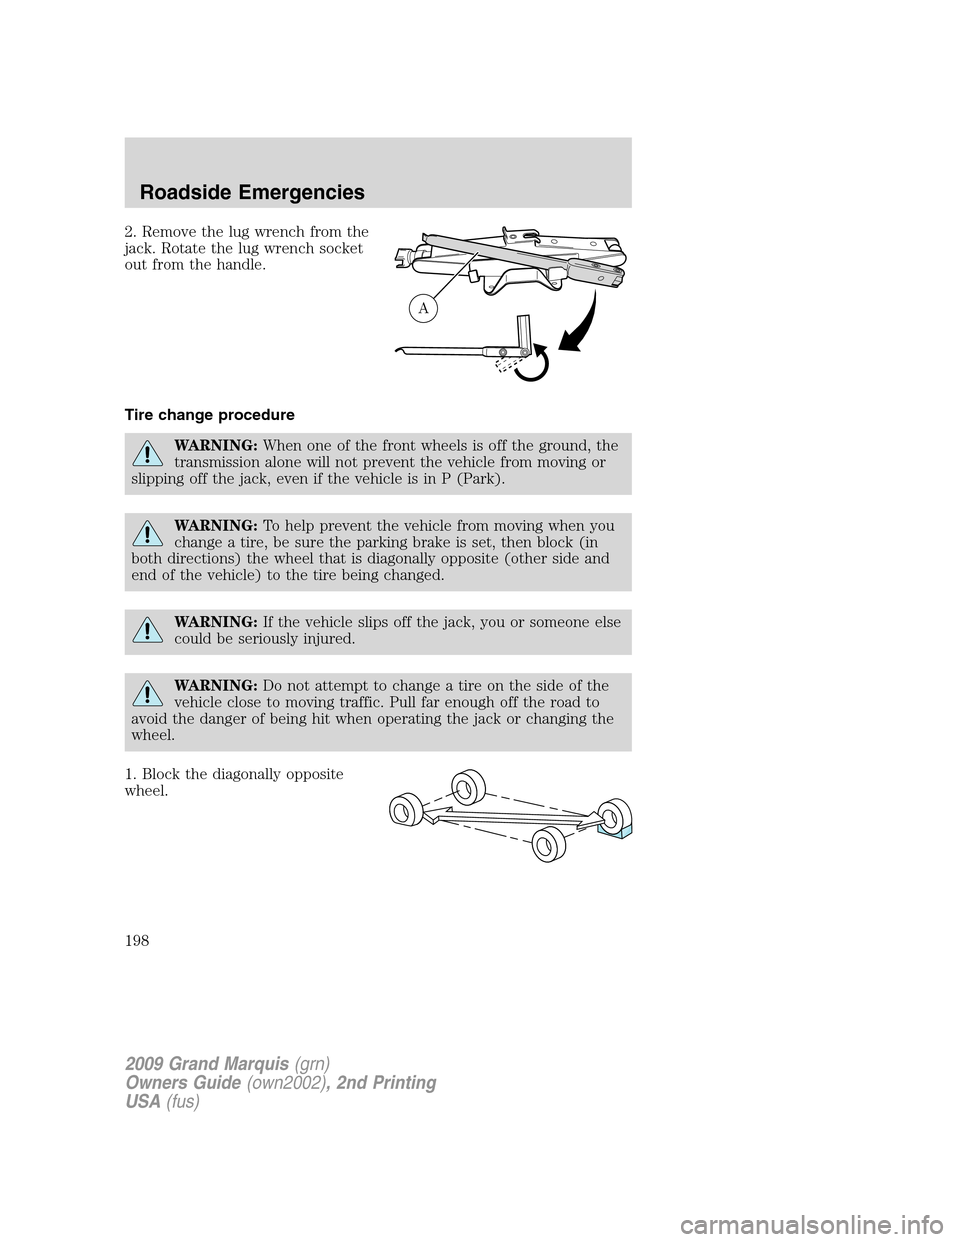 Mercury Grand Marquis 2009  Owners Manuals 2. Remove the lug wrench from the
jack. Rotate the lug wrench socket
out from the handle.
Tire change procedure
WARNING:When one of the front wheels is off the ground, the
transmission alone will not 